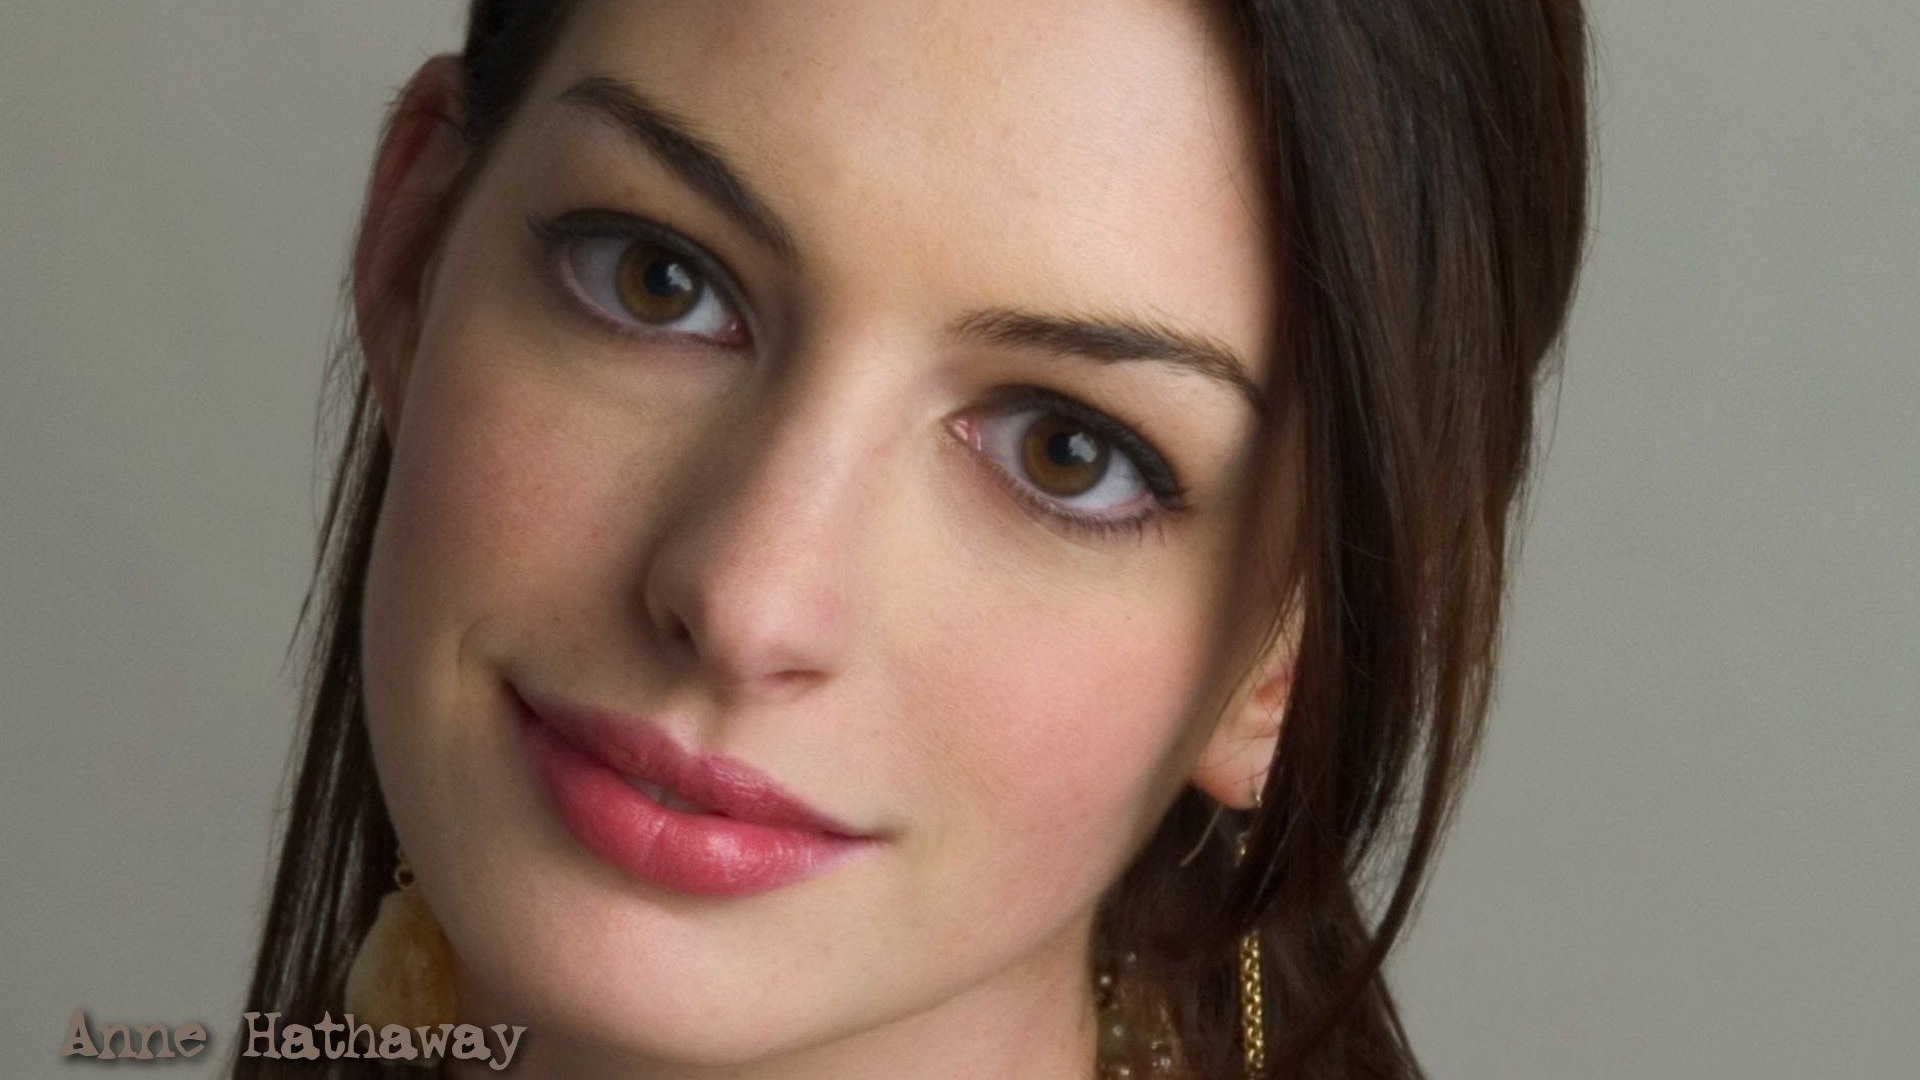 Anne Hathaway #042 - 1920x1080 Wallpapers Pictures Photos Images